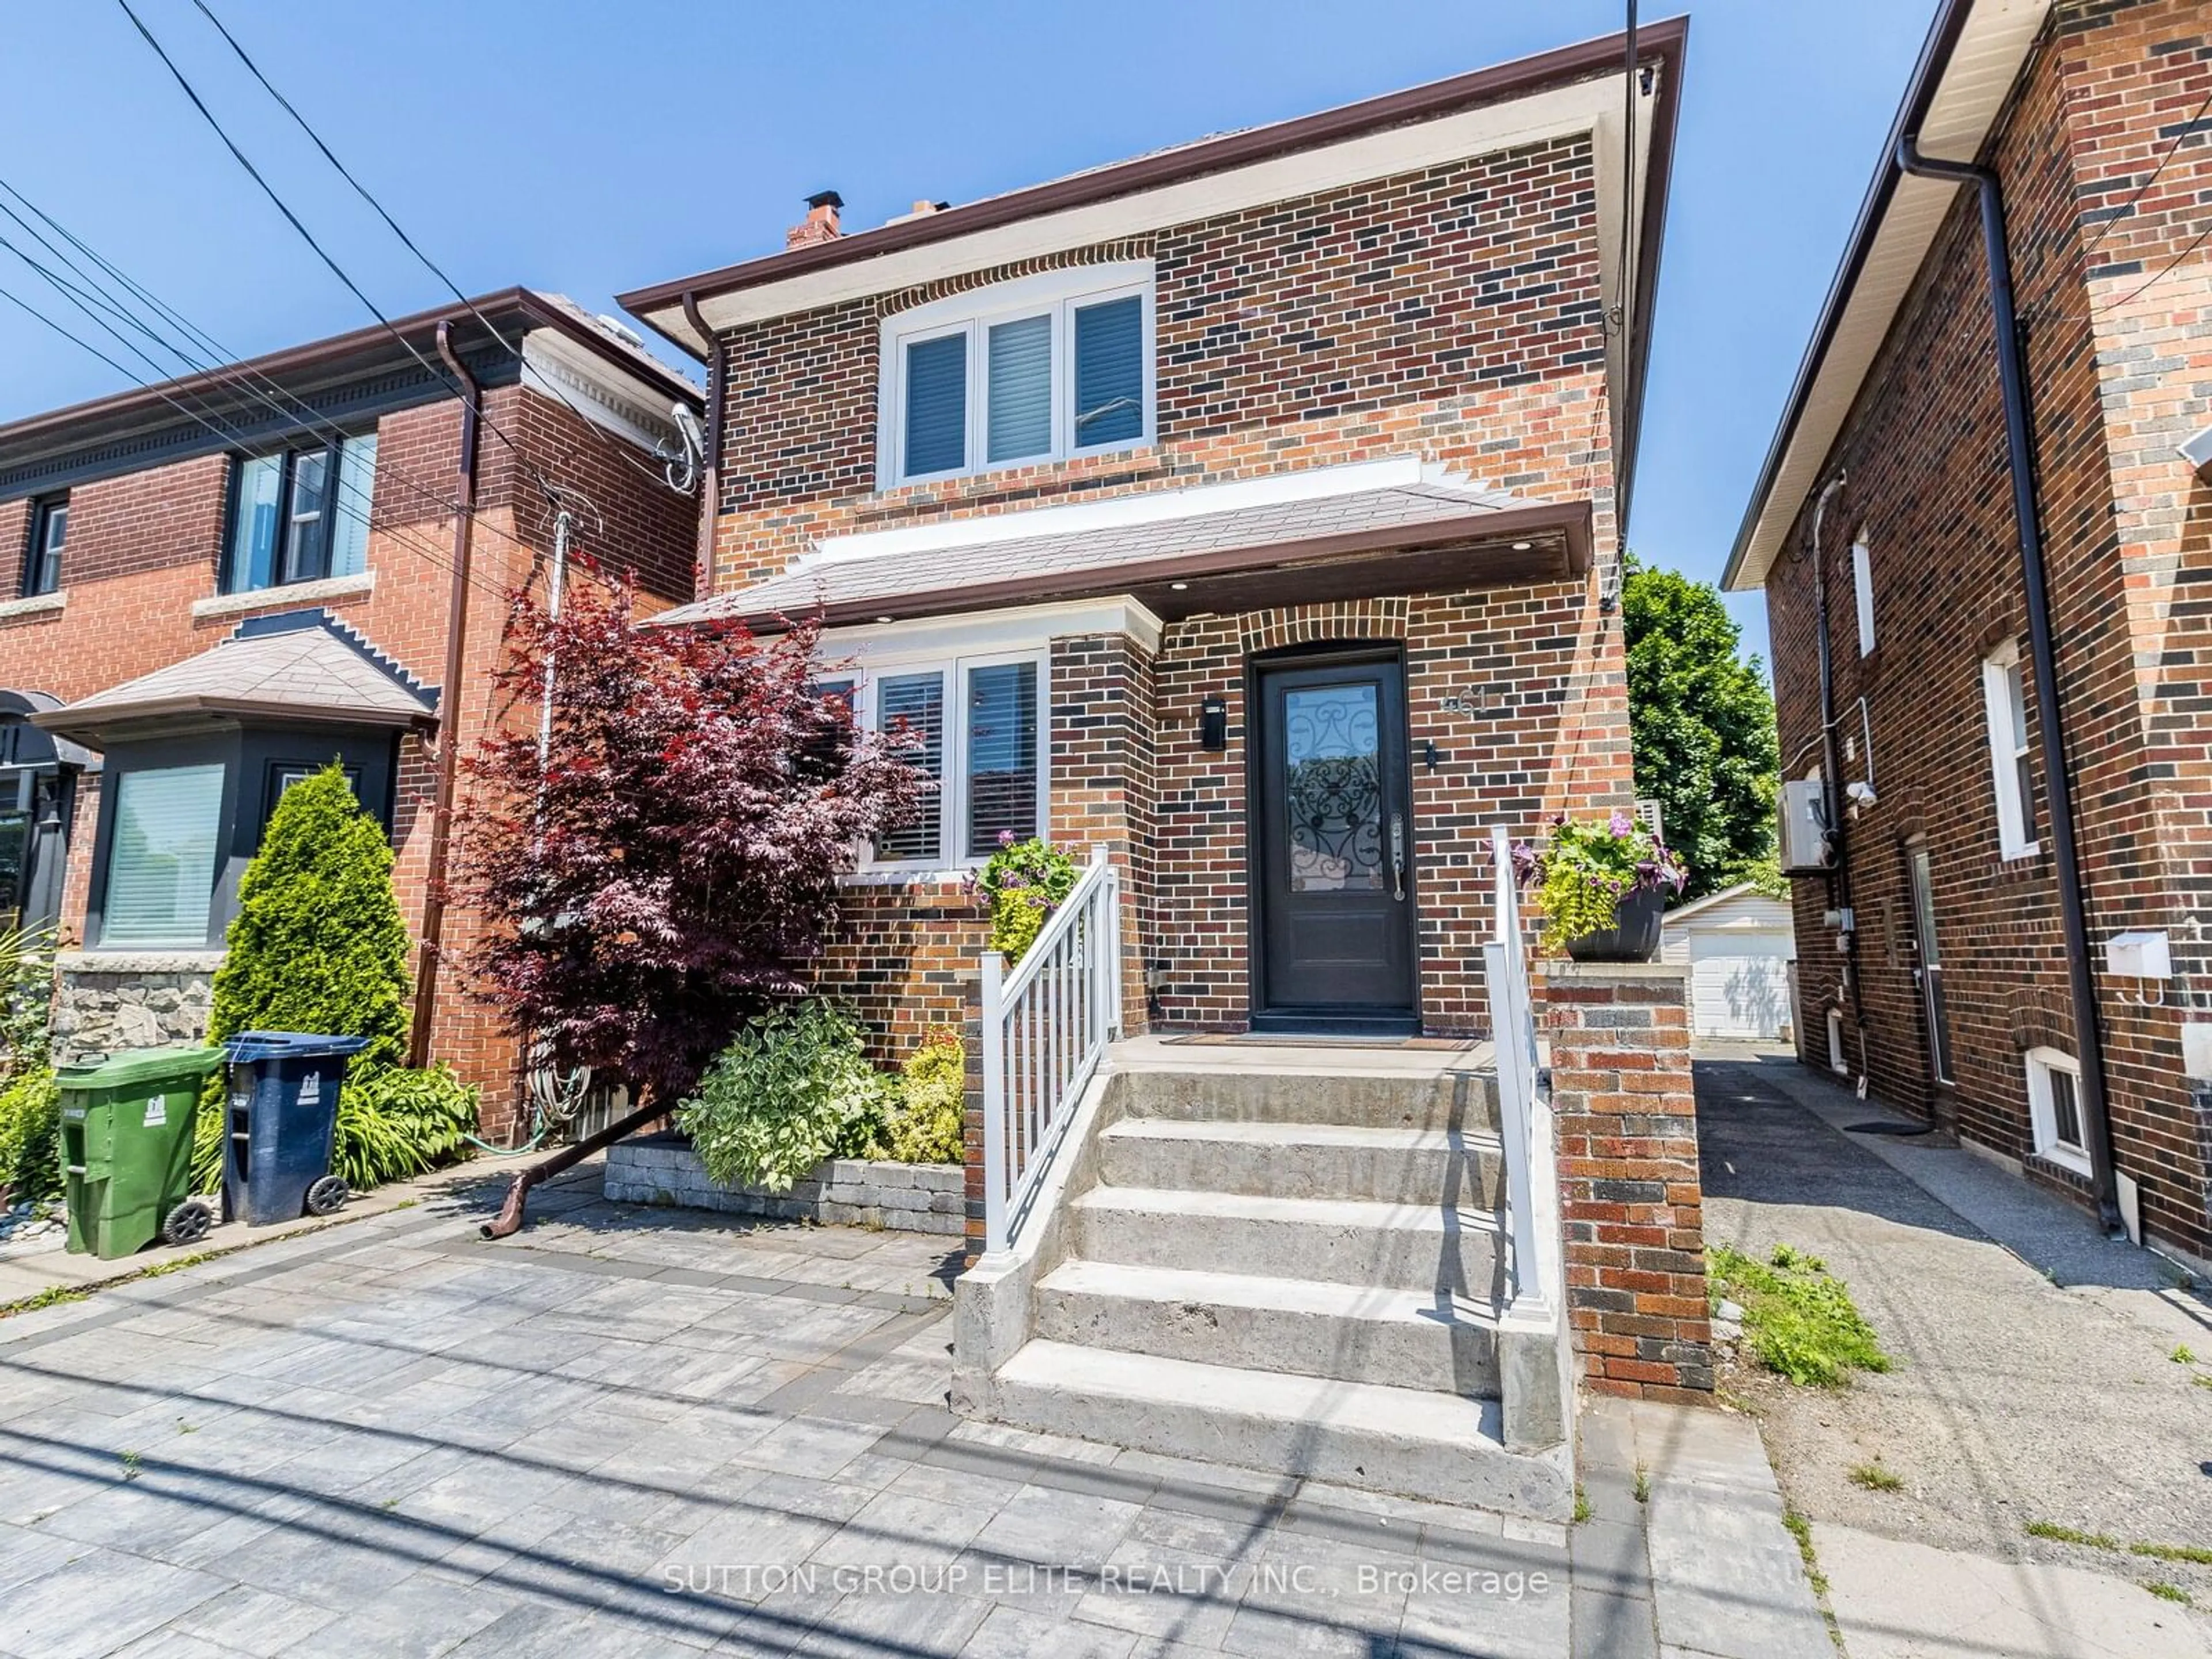 Home with brick exterior material for 461 Donlands Ave, Toronto Ontario M4J 3S4